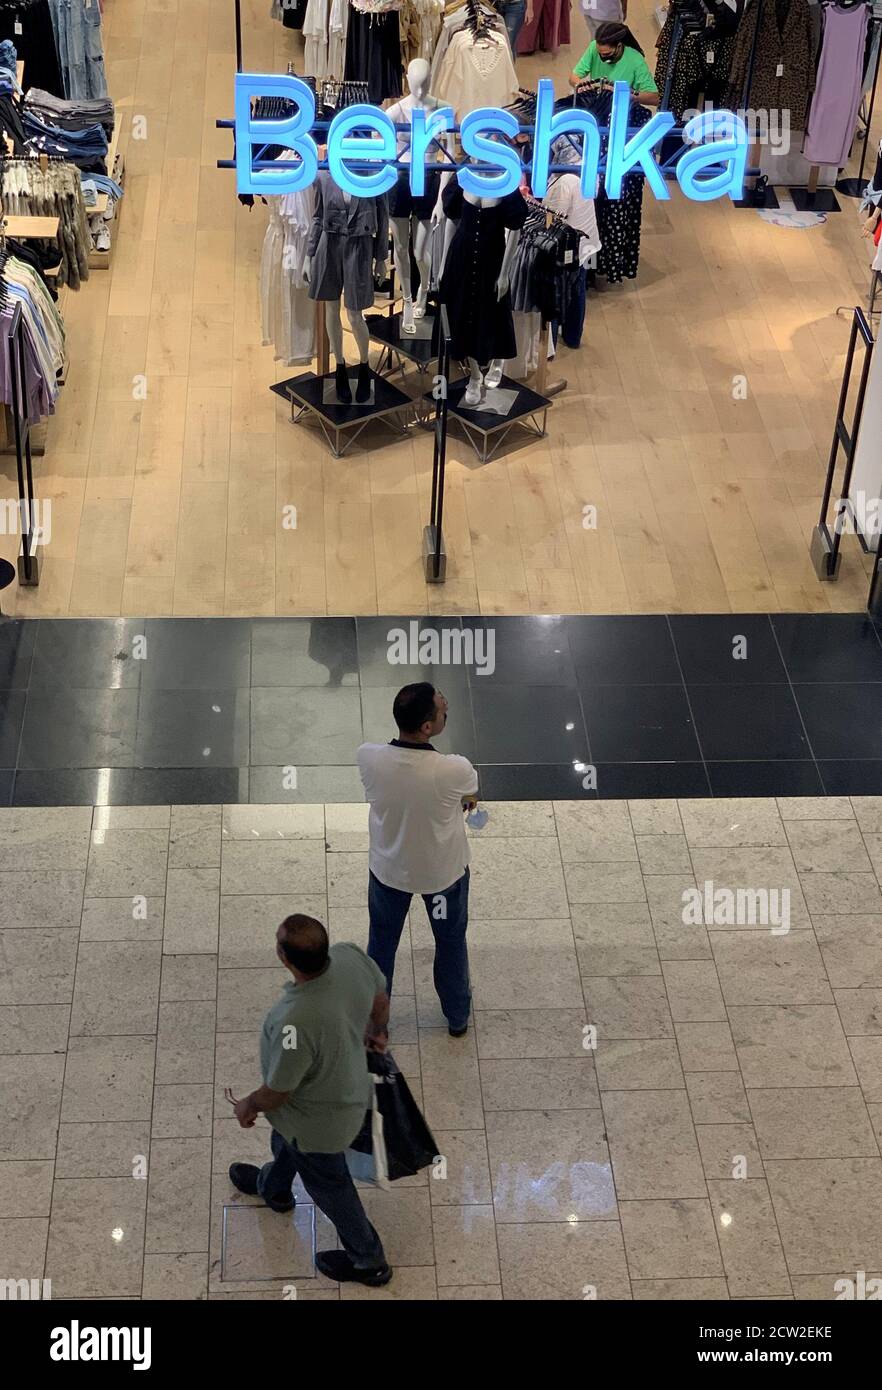 Shoppers are seen in front of Spanish clothing store Bershka, amid the  coronavirus disease (COVID-19) pandemic, at the Mall of Egypt, known as  "Mall Masr", owned and operated by the Majid Al